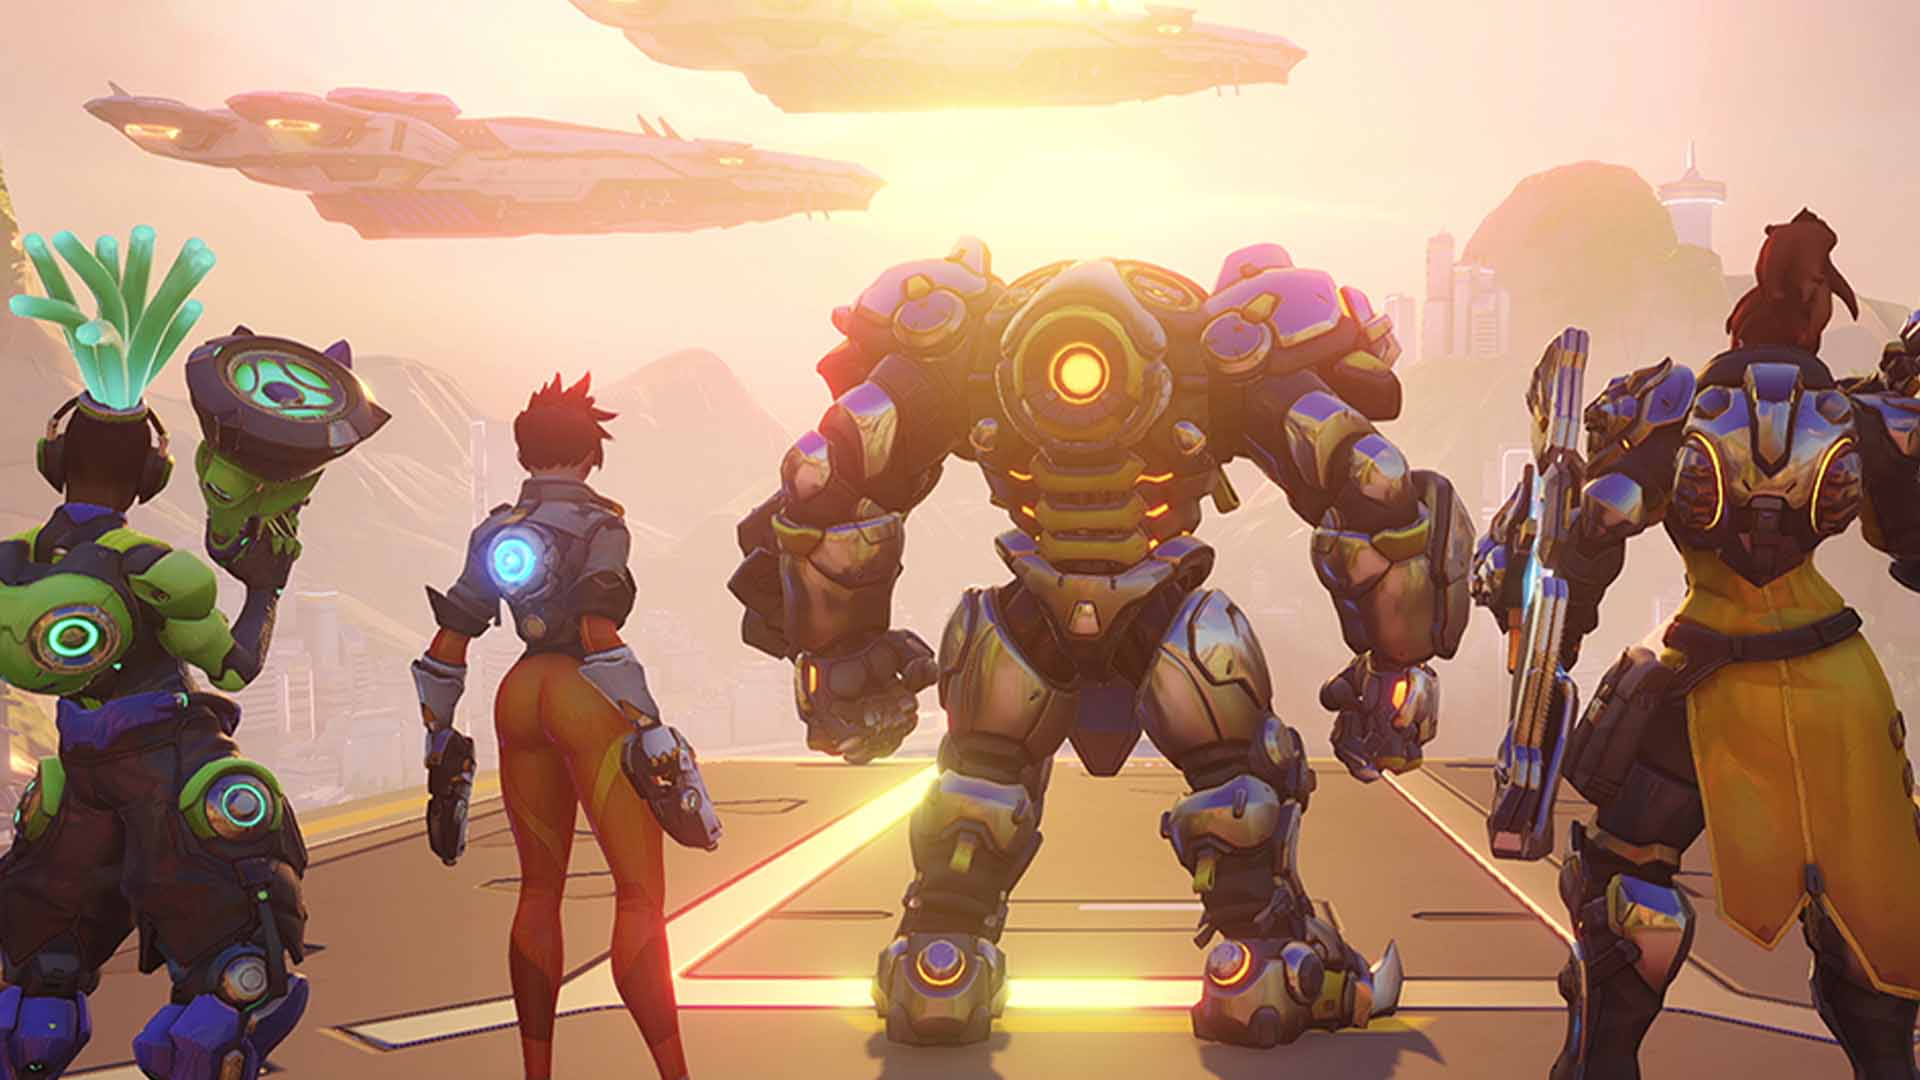 Prime Gaming Offers Overwatch/Heartstone Content; 8 New Games for